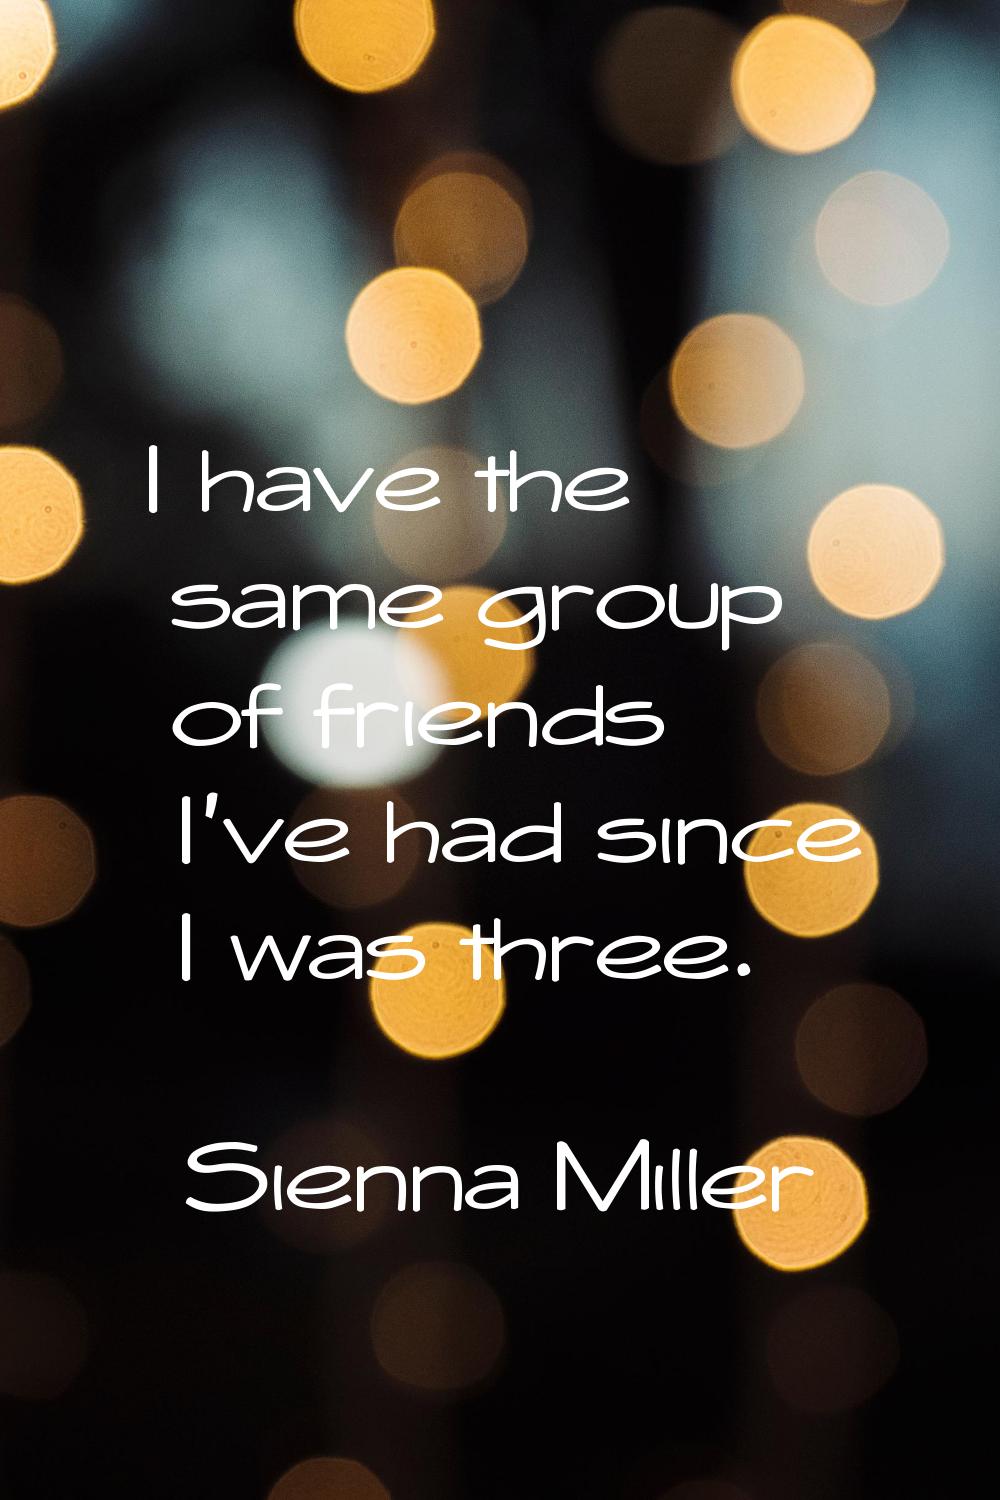 I have the same group of friends I've had since I was three.